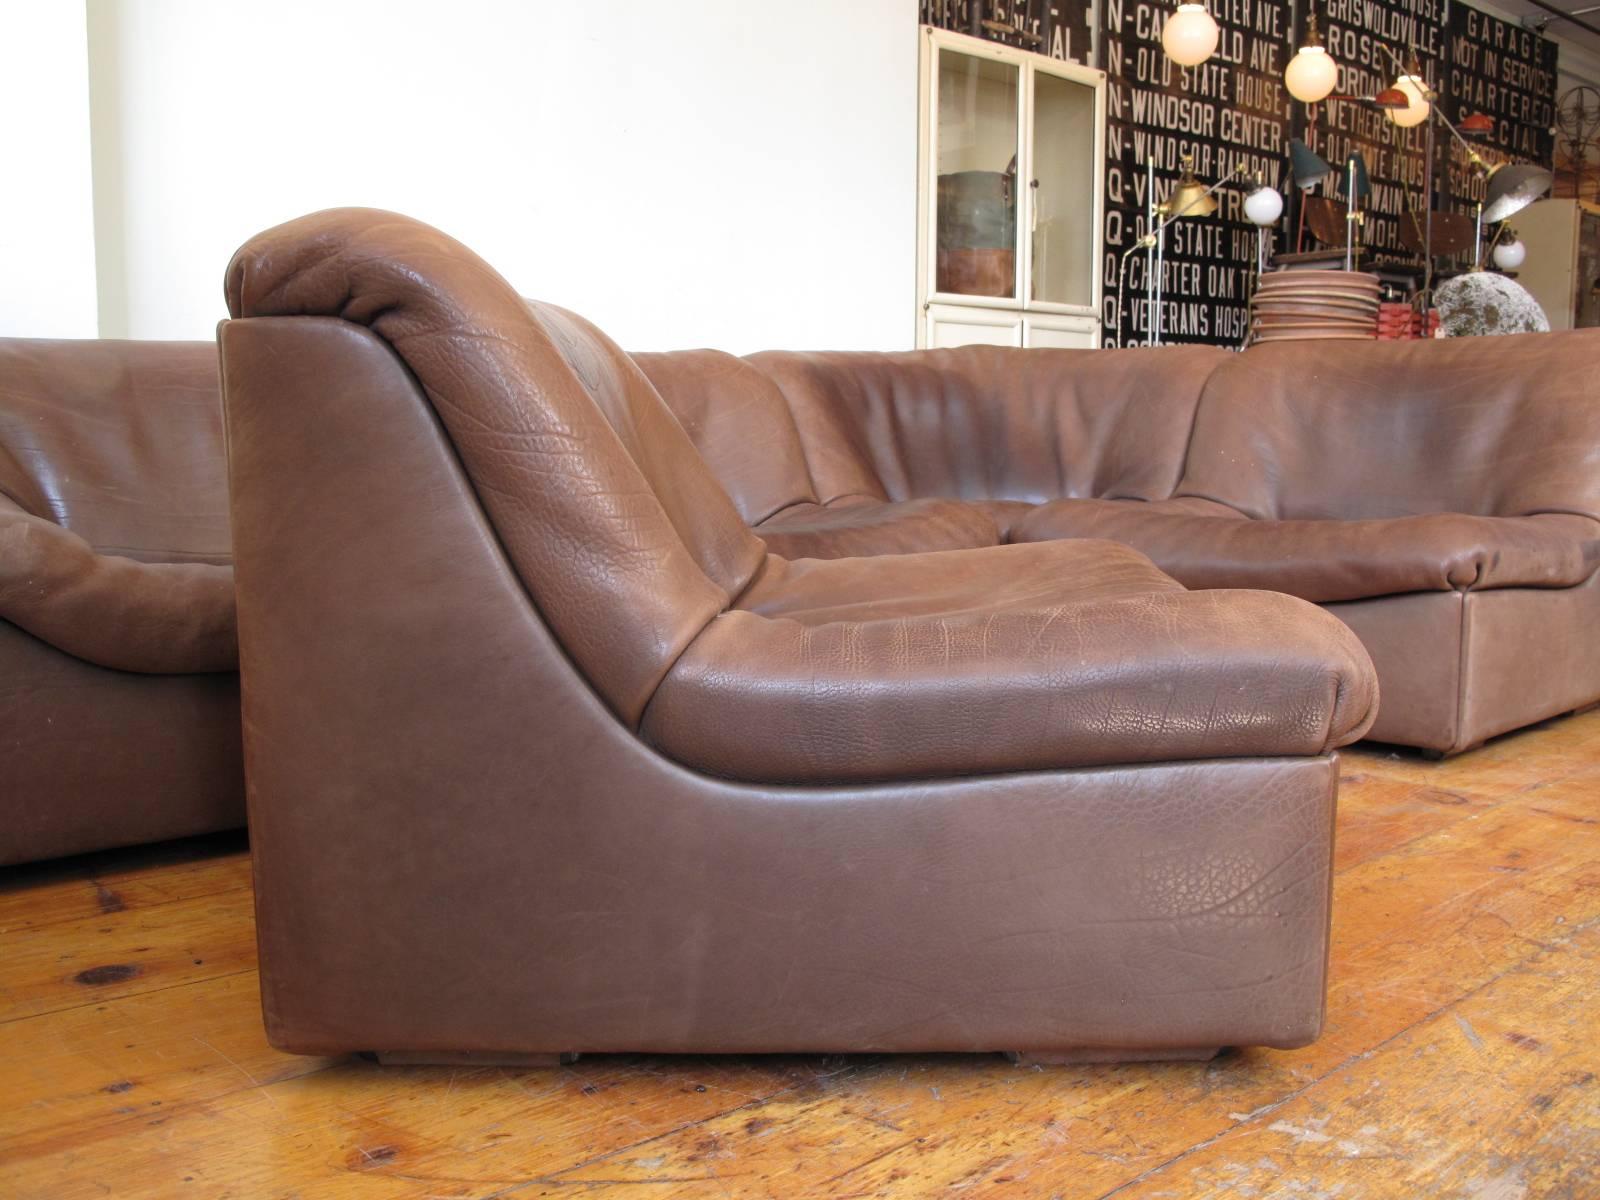 Late 20th century five-piece section sofa. Made by De Sede, Switzerland in the 1970s. Original buffalo leather.

Note: Measurements below apply to each individual piece.